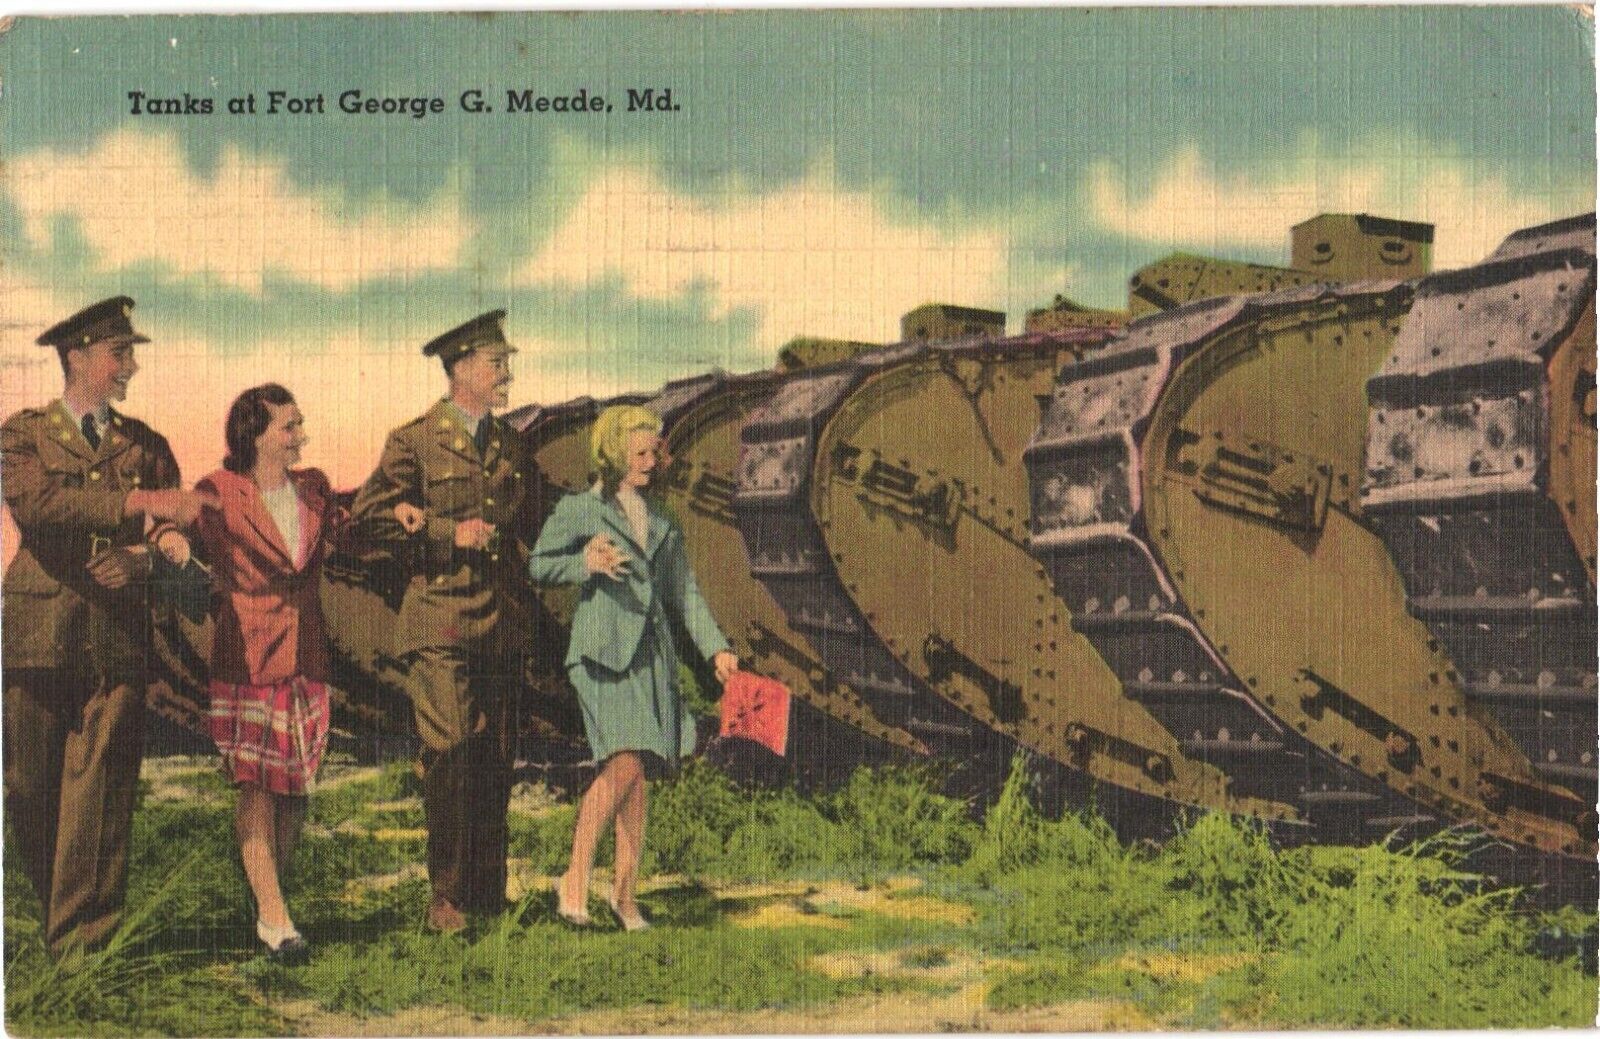 Men & Women Looking Around the Tanks at Fort George G. Meade, Maryland Postcard